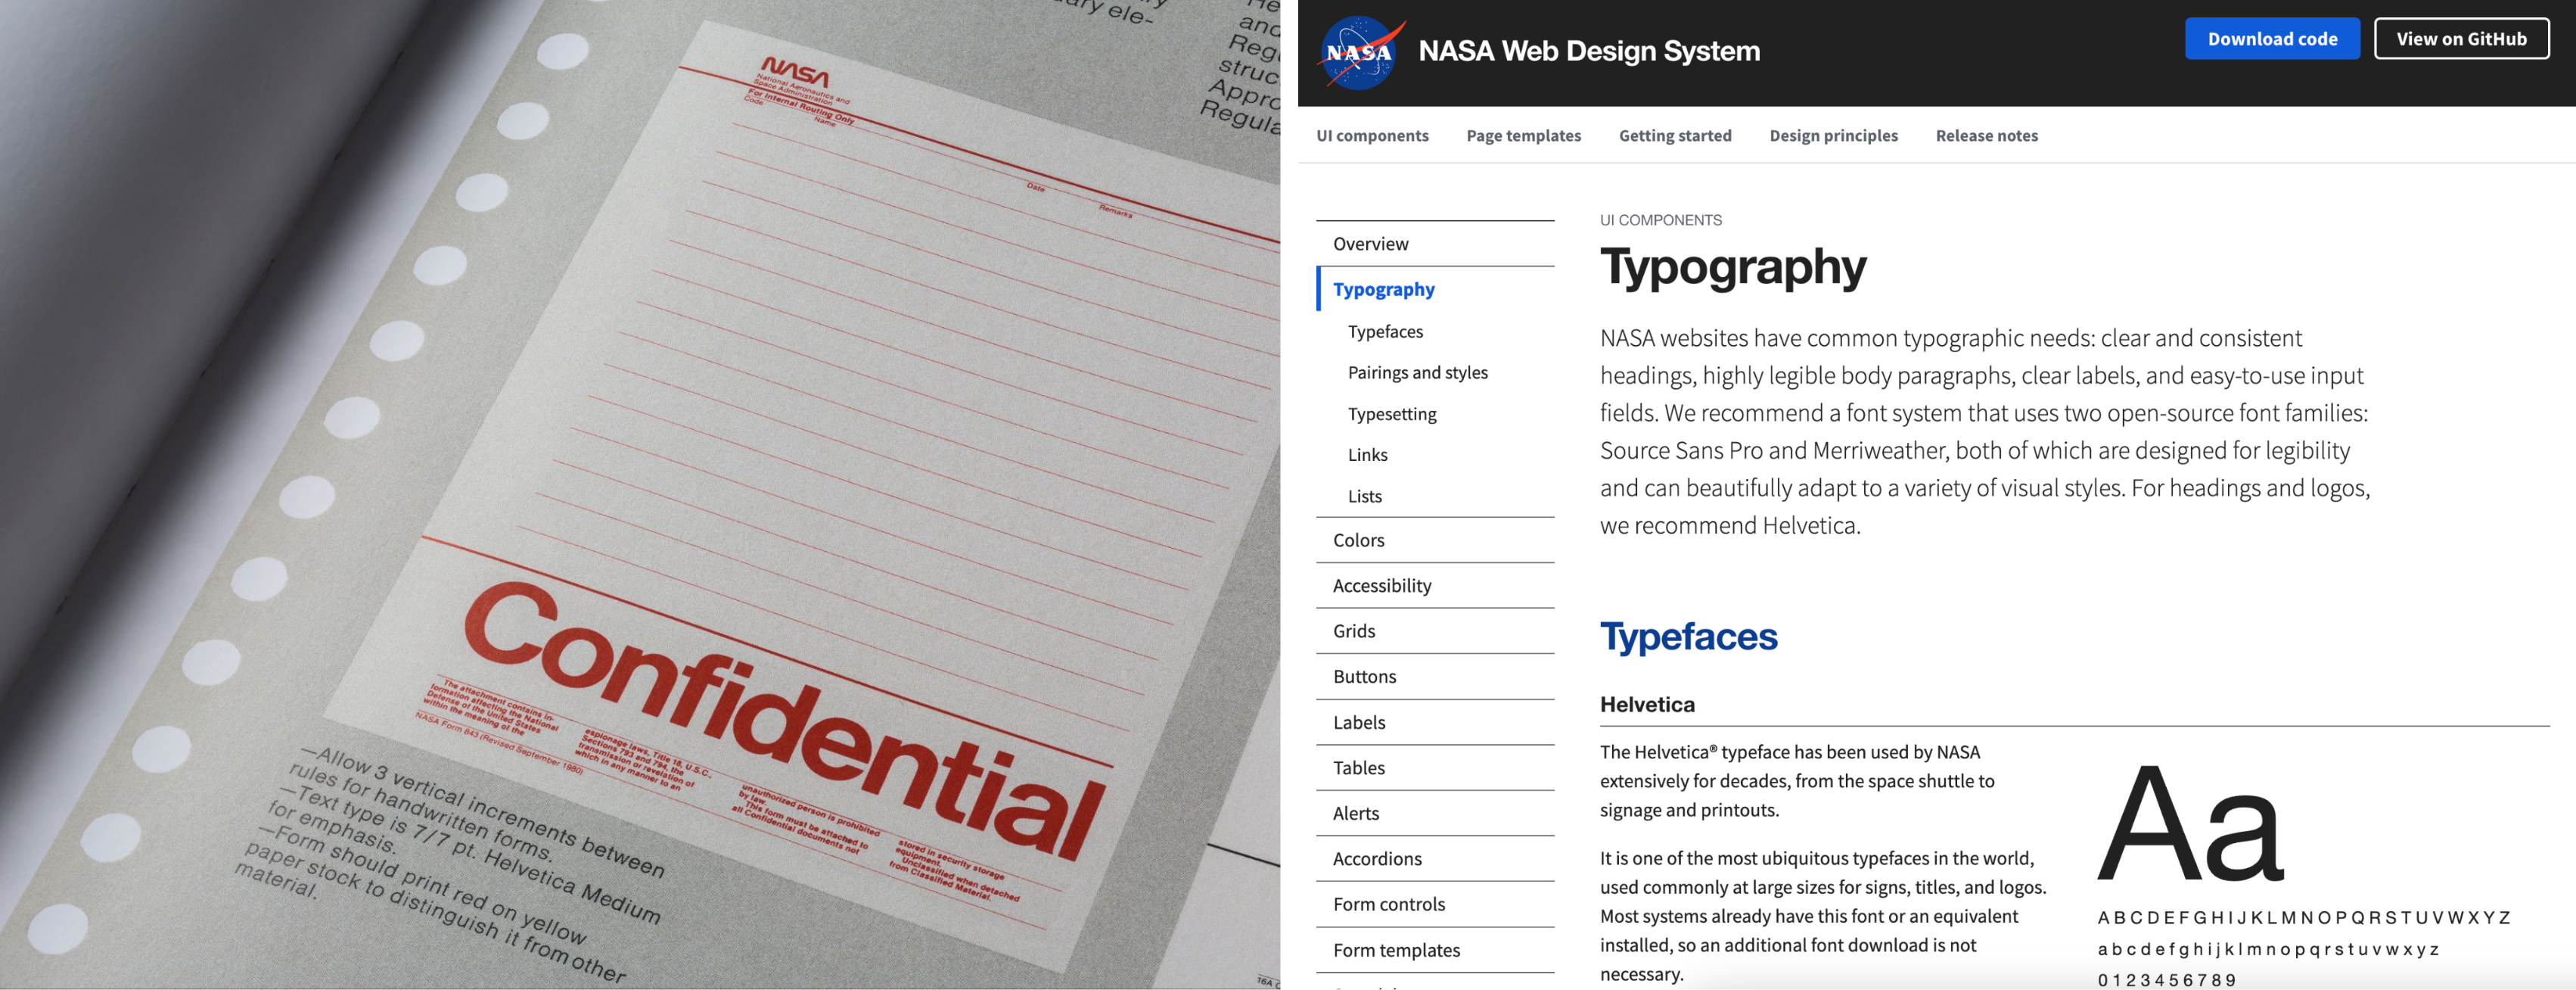 Side-by-side screenshots showing similar font guidelines in NASA's current design system and their original design guide published in 1975